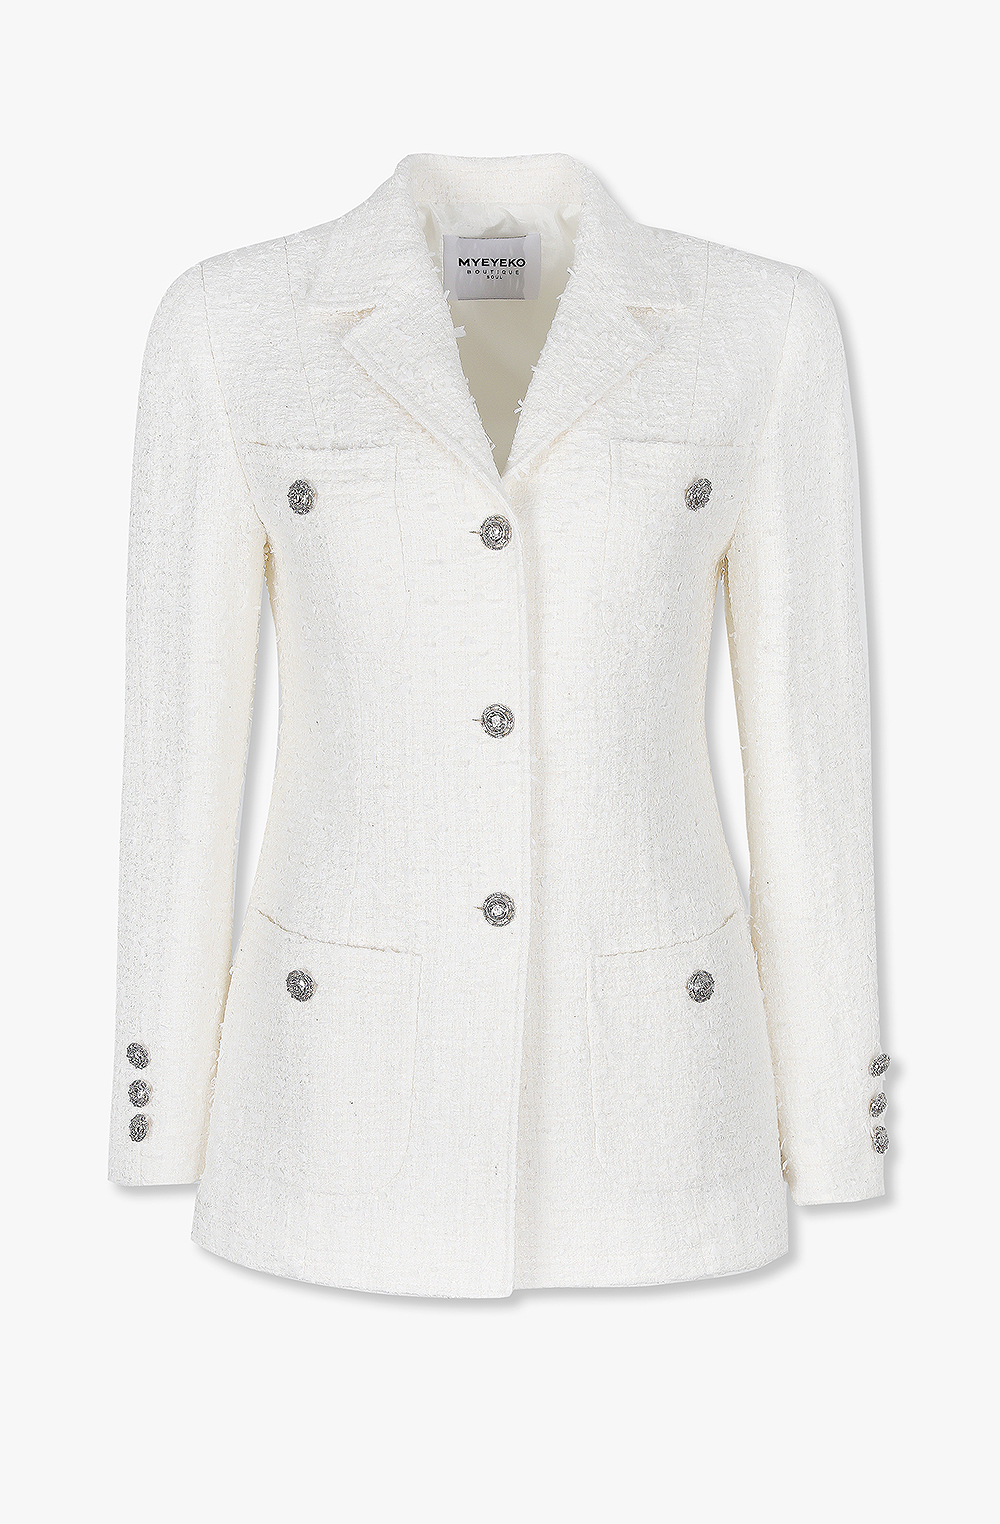 HIGH QUALITY LINE - MYEYEKO 23 EARLY SPRING / IVORY TWEED JACKET (Fabric by, Made in JAPAN)